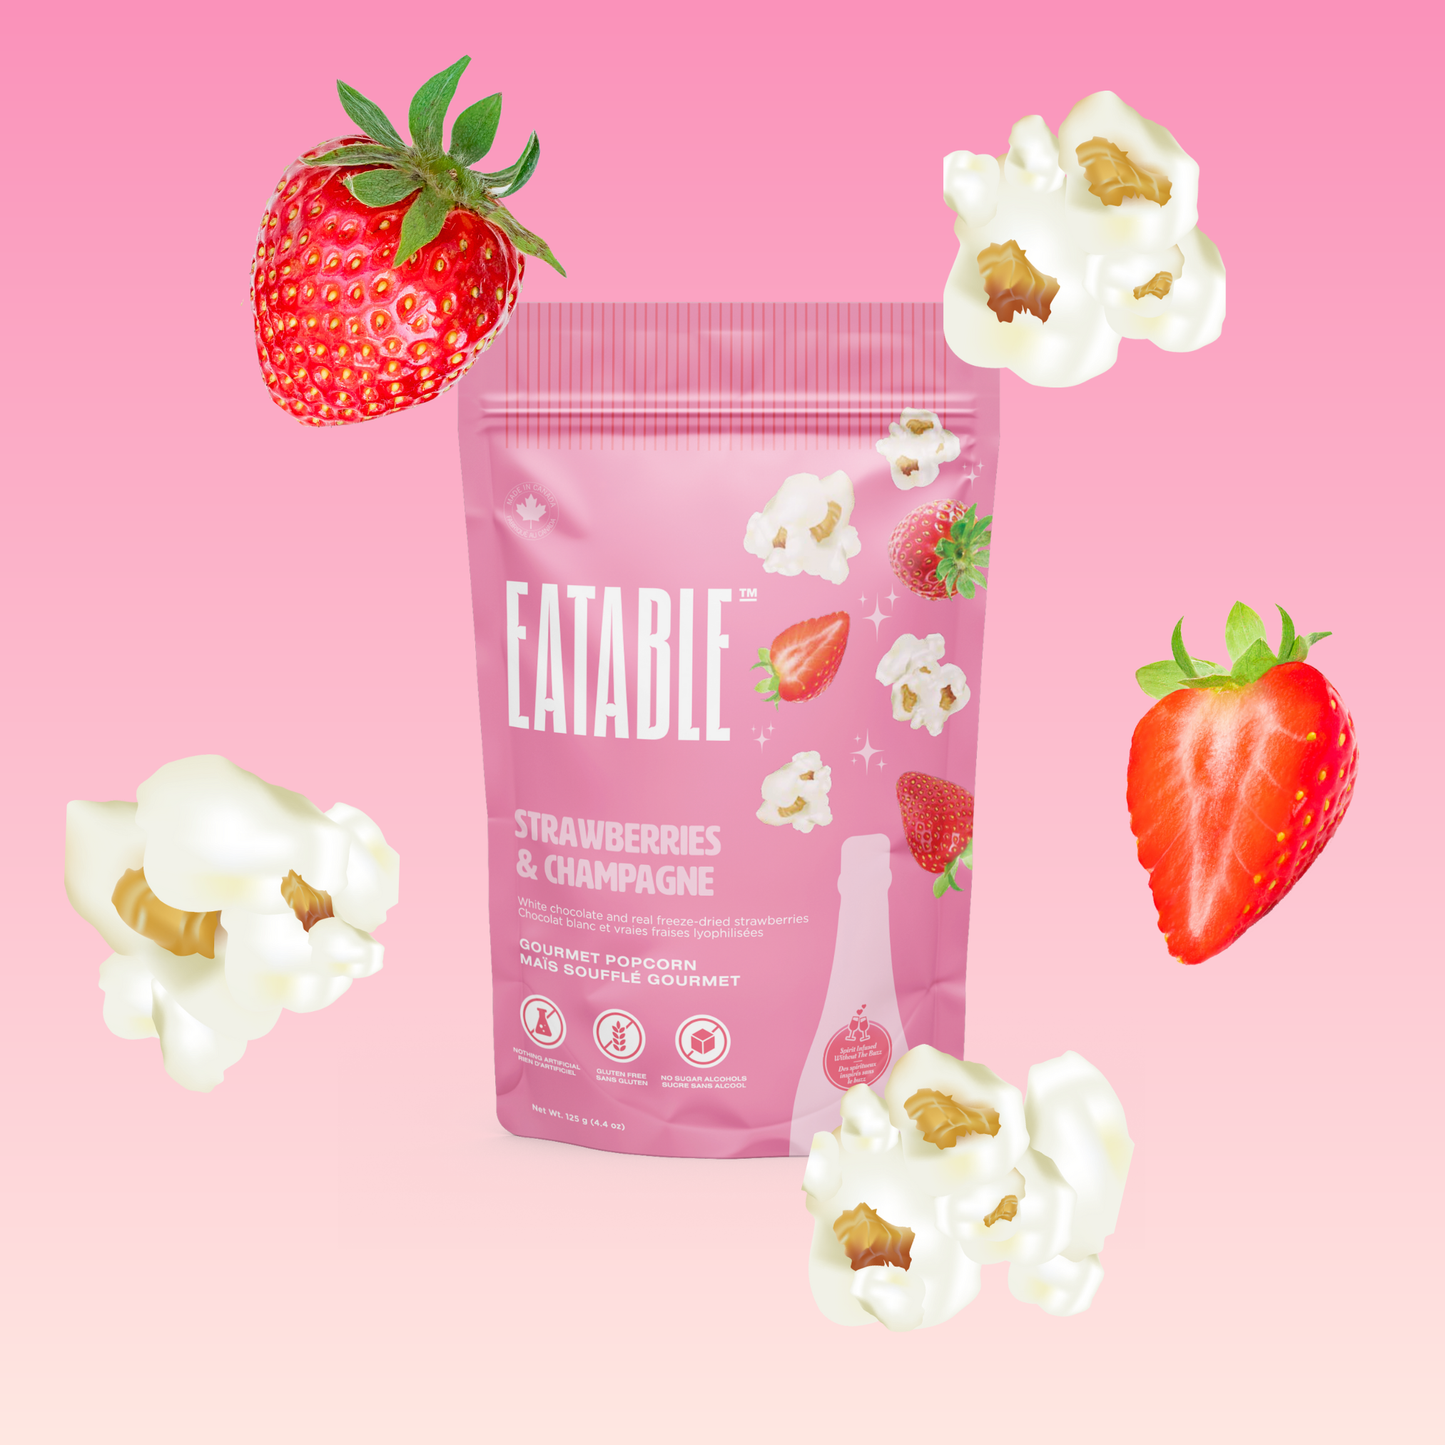 EATABLE Popcorn - NEW ✨ Strawberries & Champagne (125g) 🍿🍓 Chocolate Popcorn: US Package